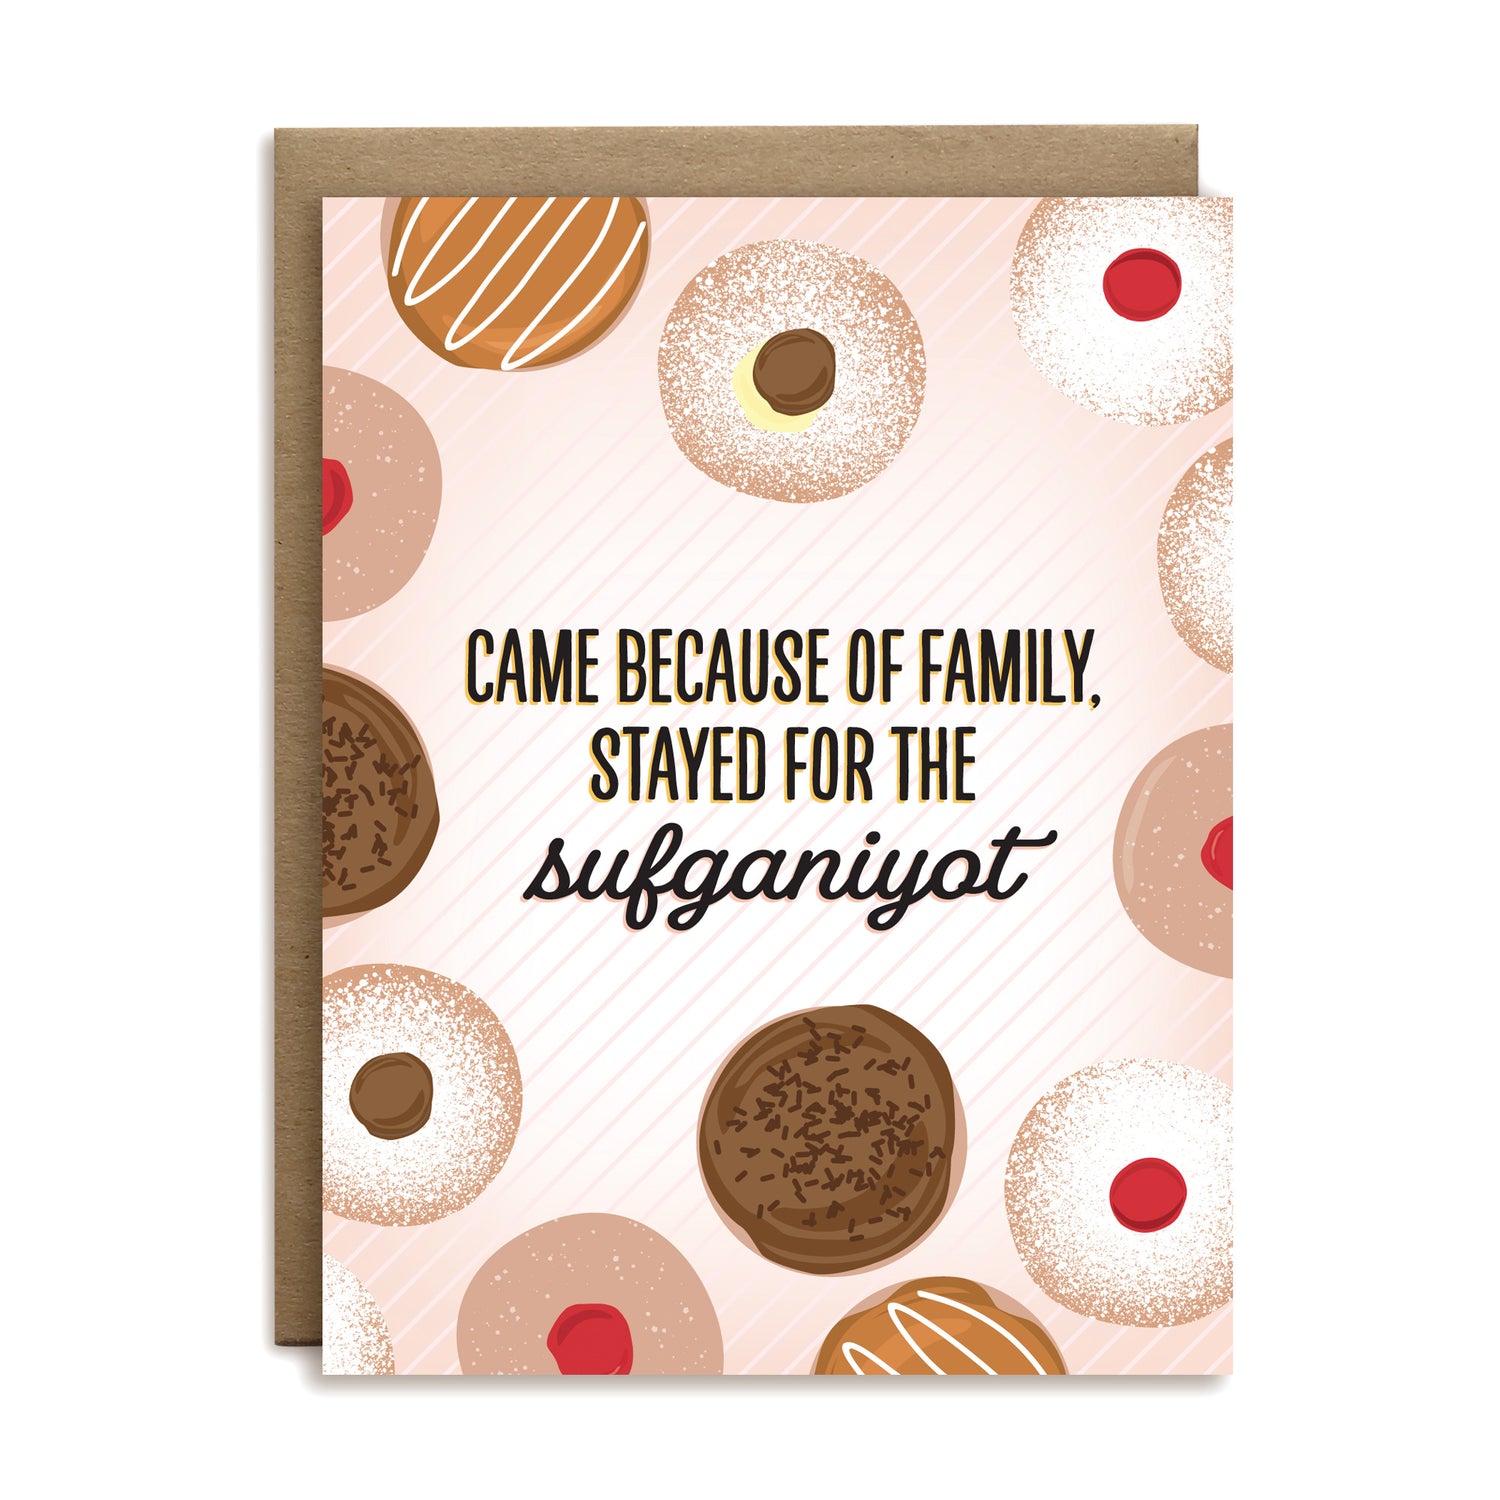 Came because of family, stayed for the sufganiyot Hanukkah greeting card by I&